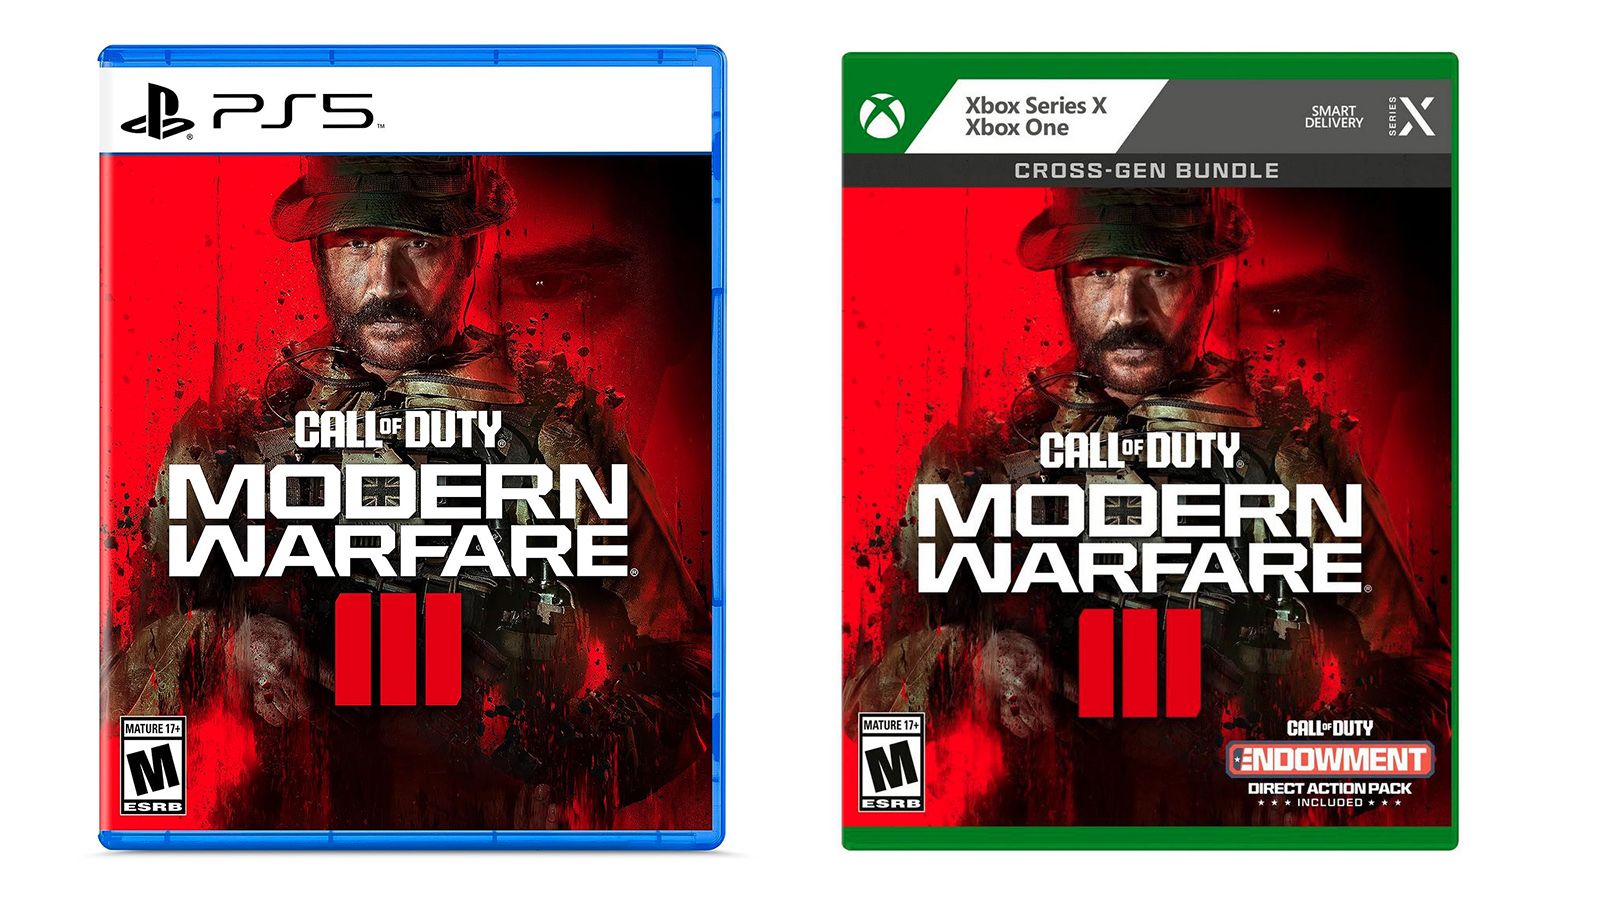 Call of Duty: Call of Duty: Modern Warfare 3: All you may want to